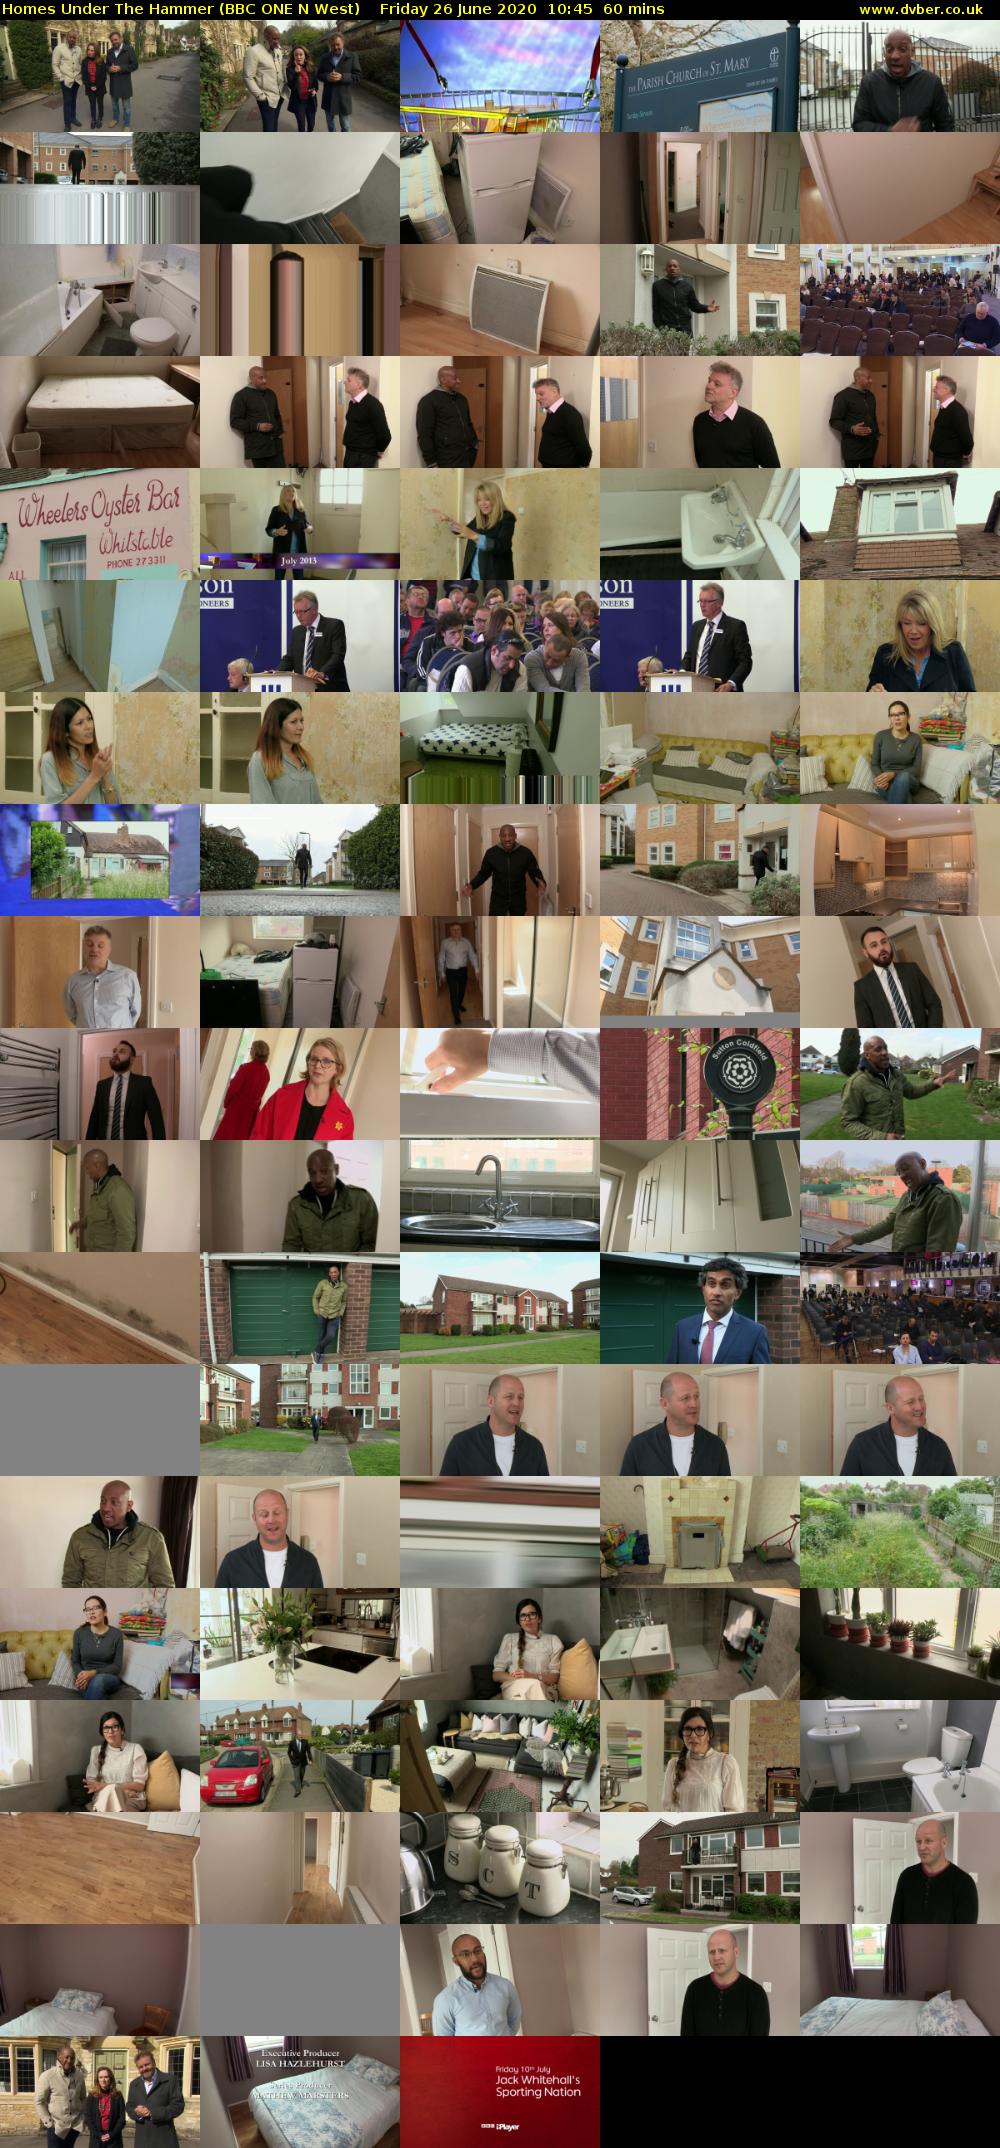 Homes Under The Hammer (BBC ONE N West) Friday 26 June 2020 10:45 - 11:45